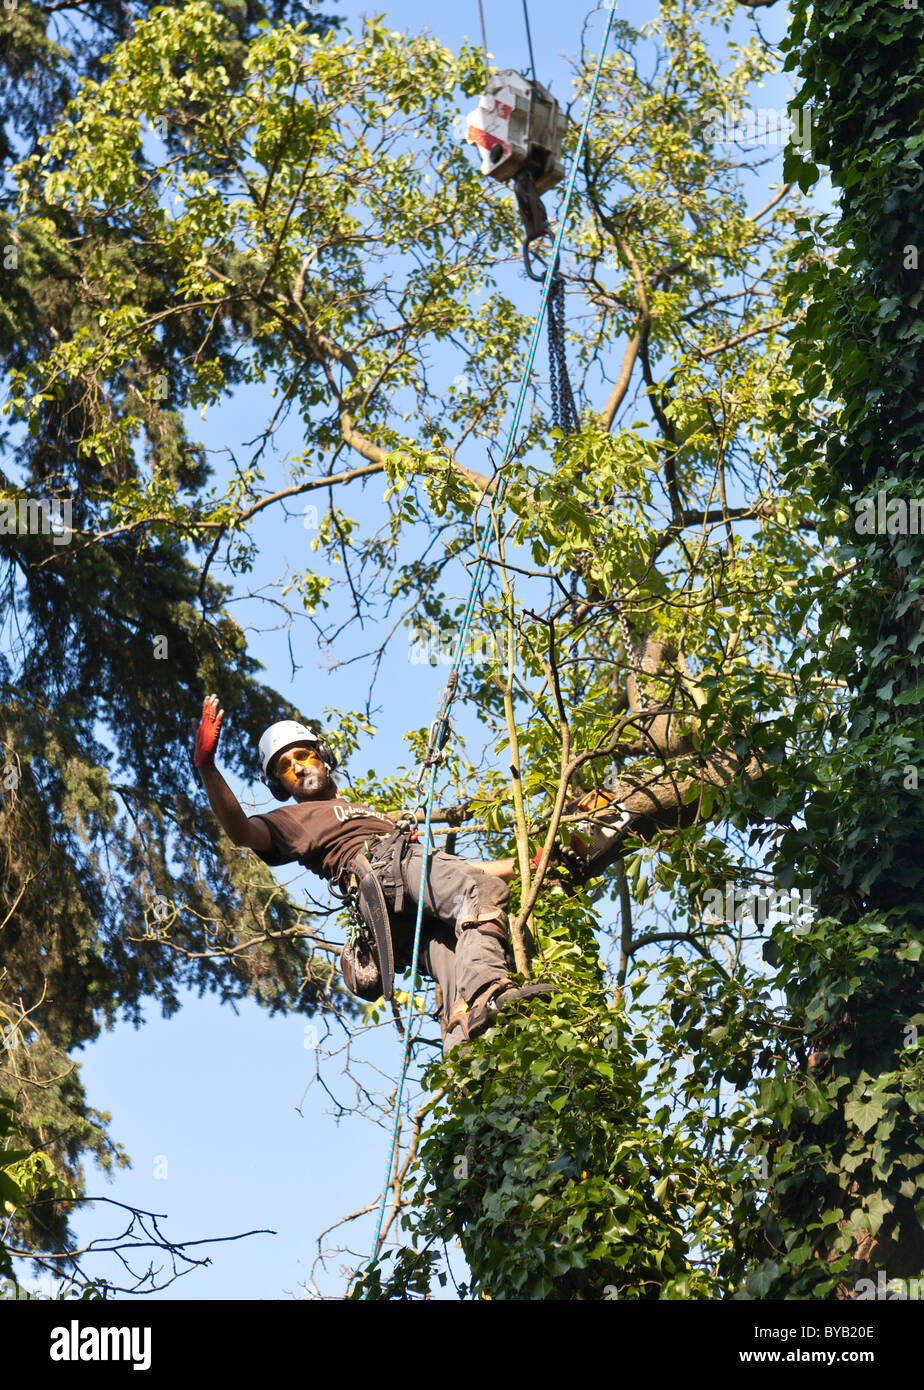 Lumberjack secured by a rope preparing to gradually fell a tree with a chainsaw, Germany, Europe Stock Photo